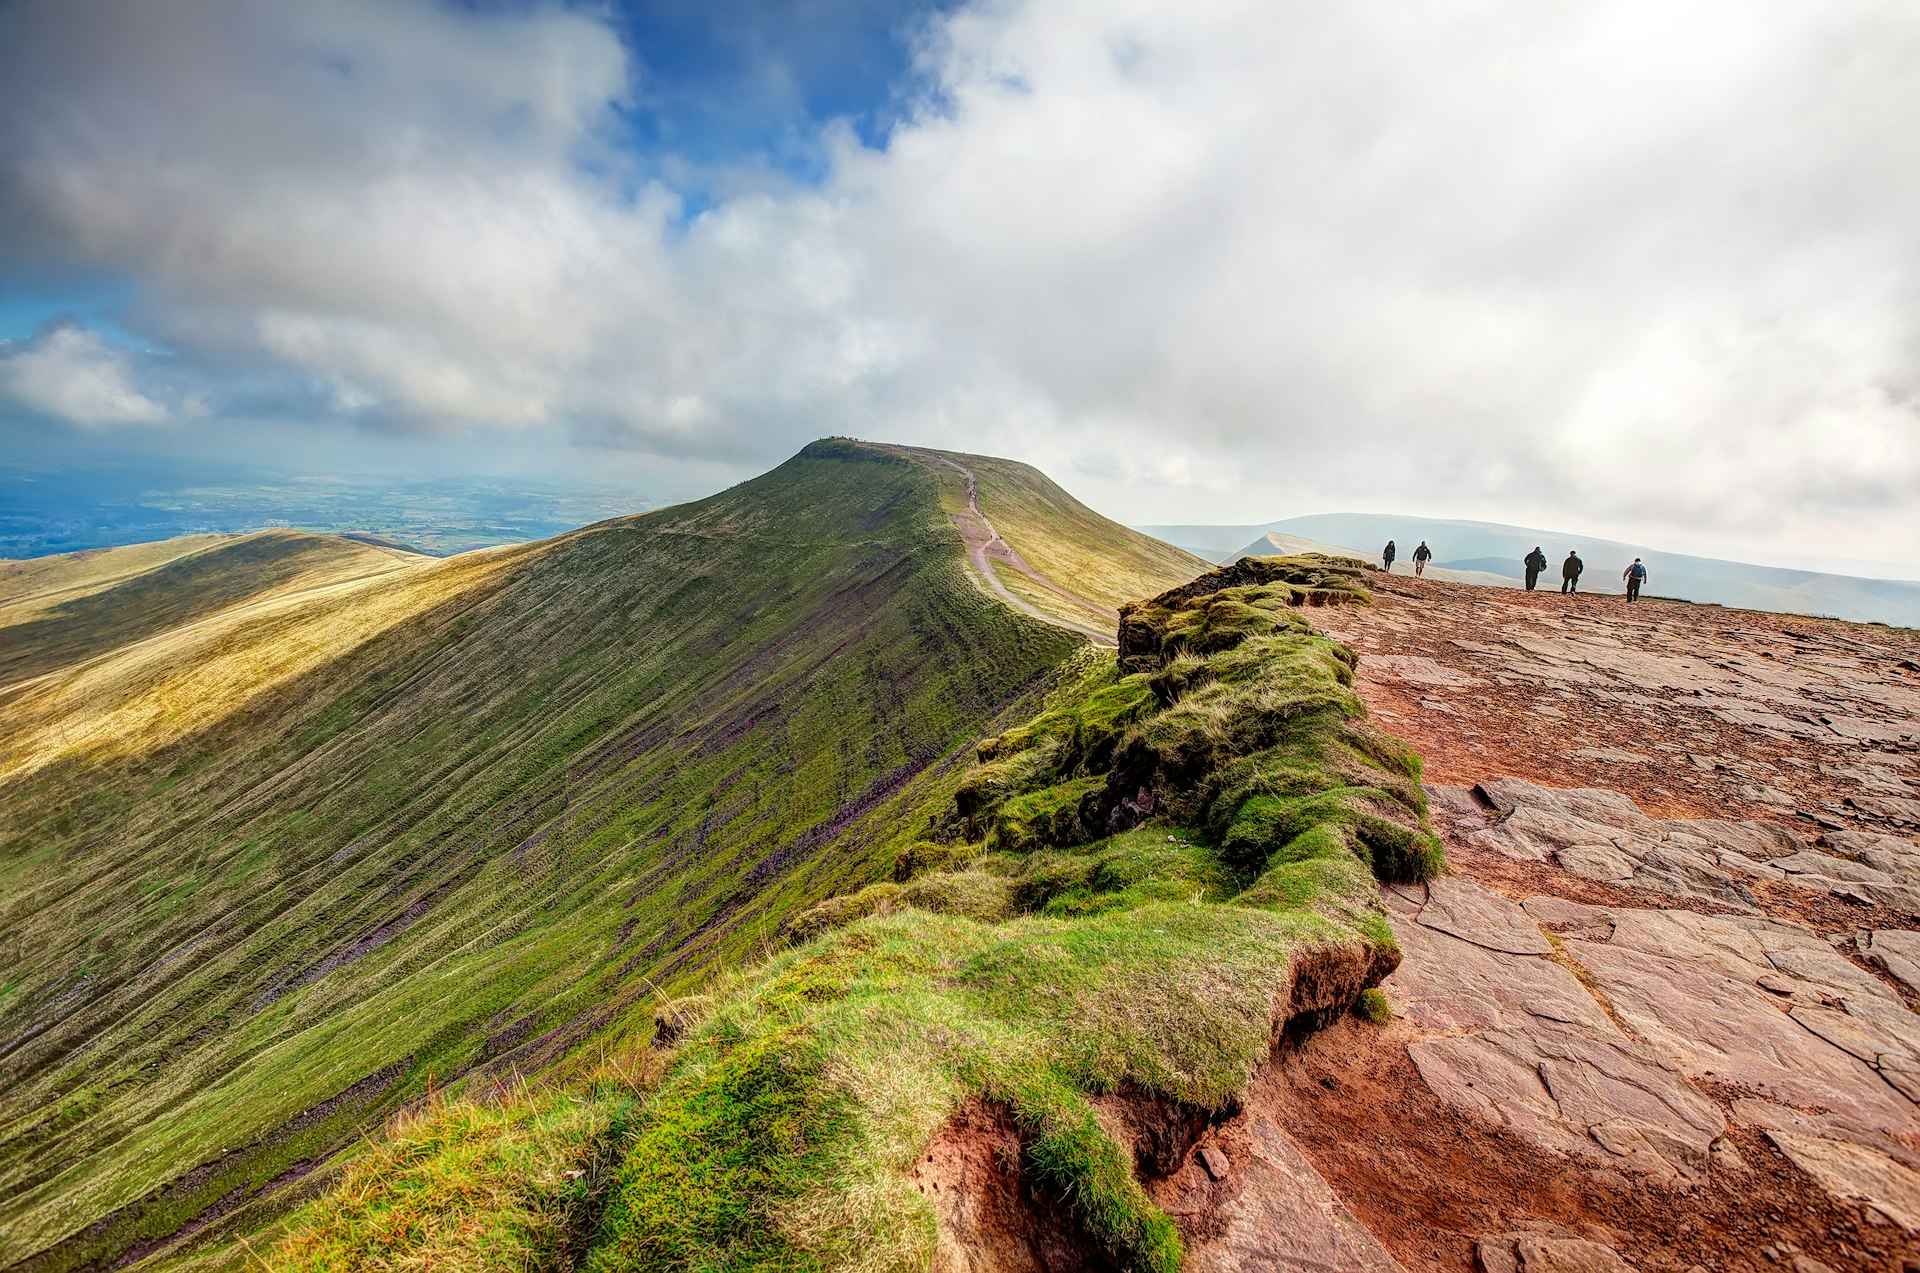 Walkers on the summit of Corn Du in Brecon Beacons National Park, Wales